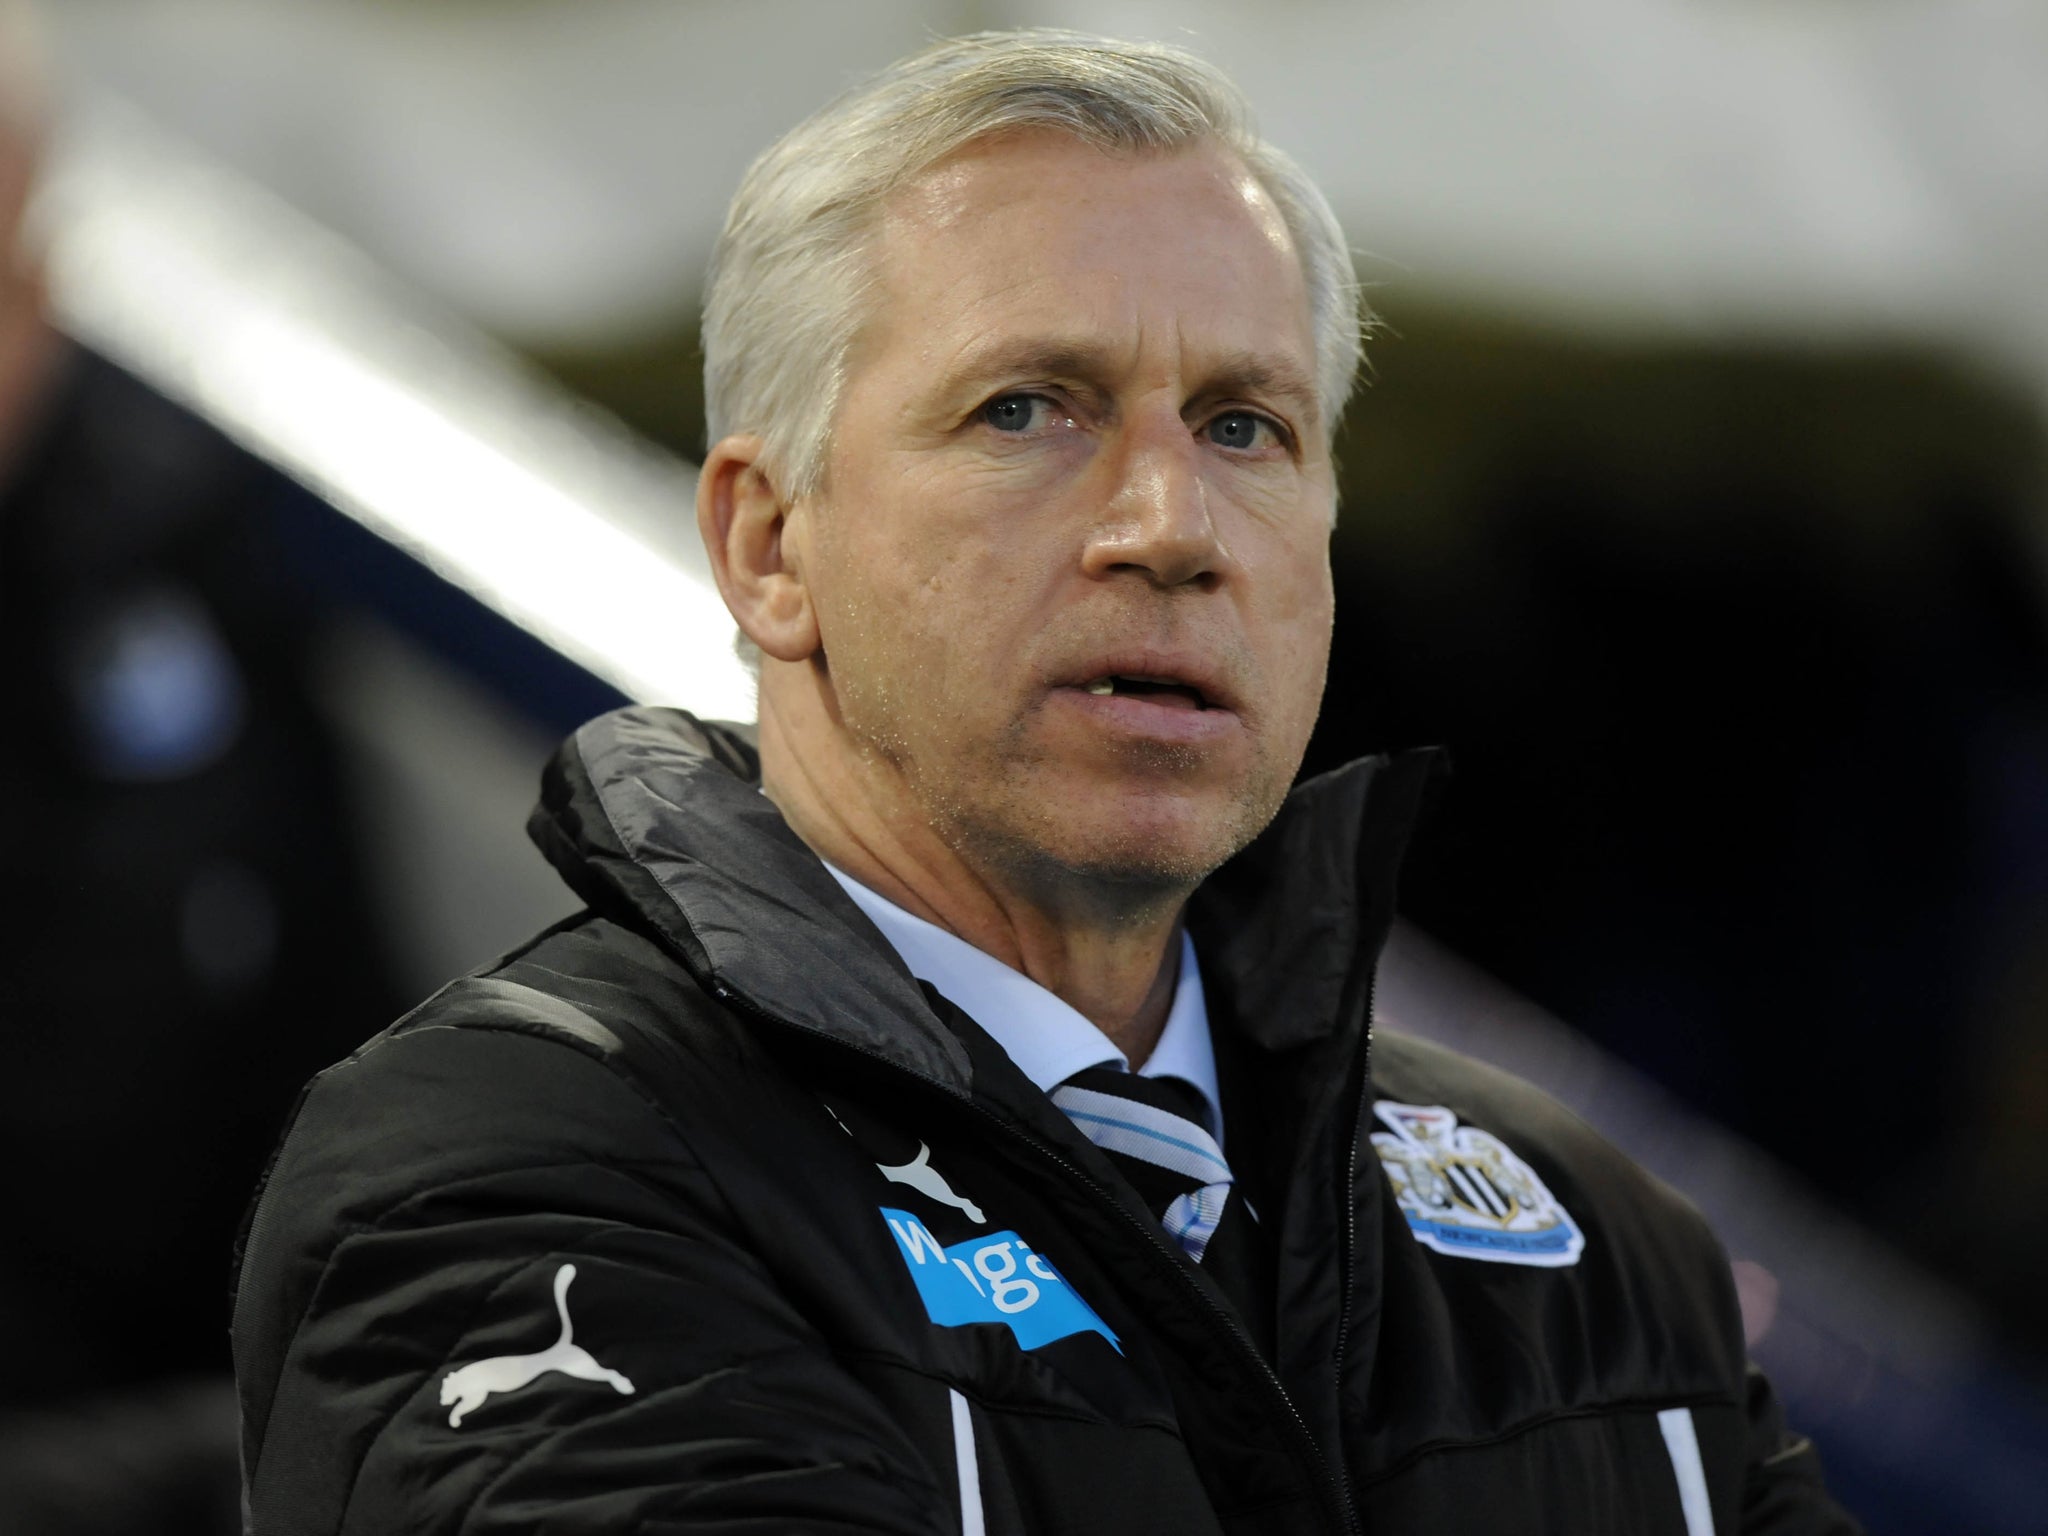 Alan Pardew wants a change to the fixture schedule to help teams competing in the Europa League